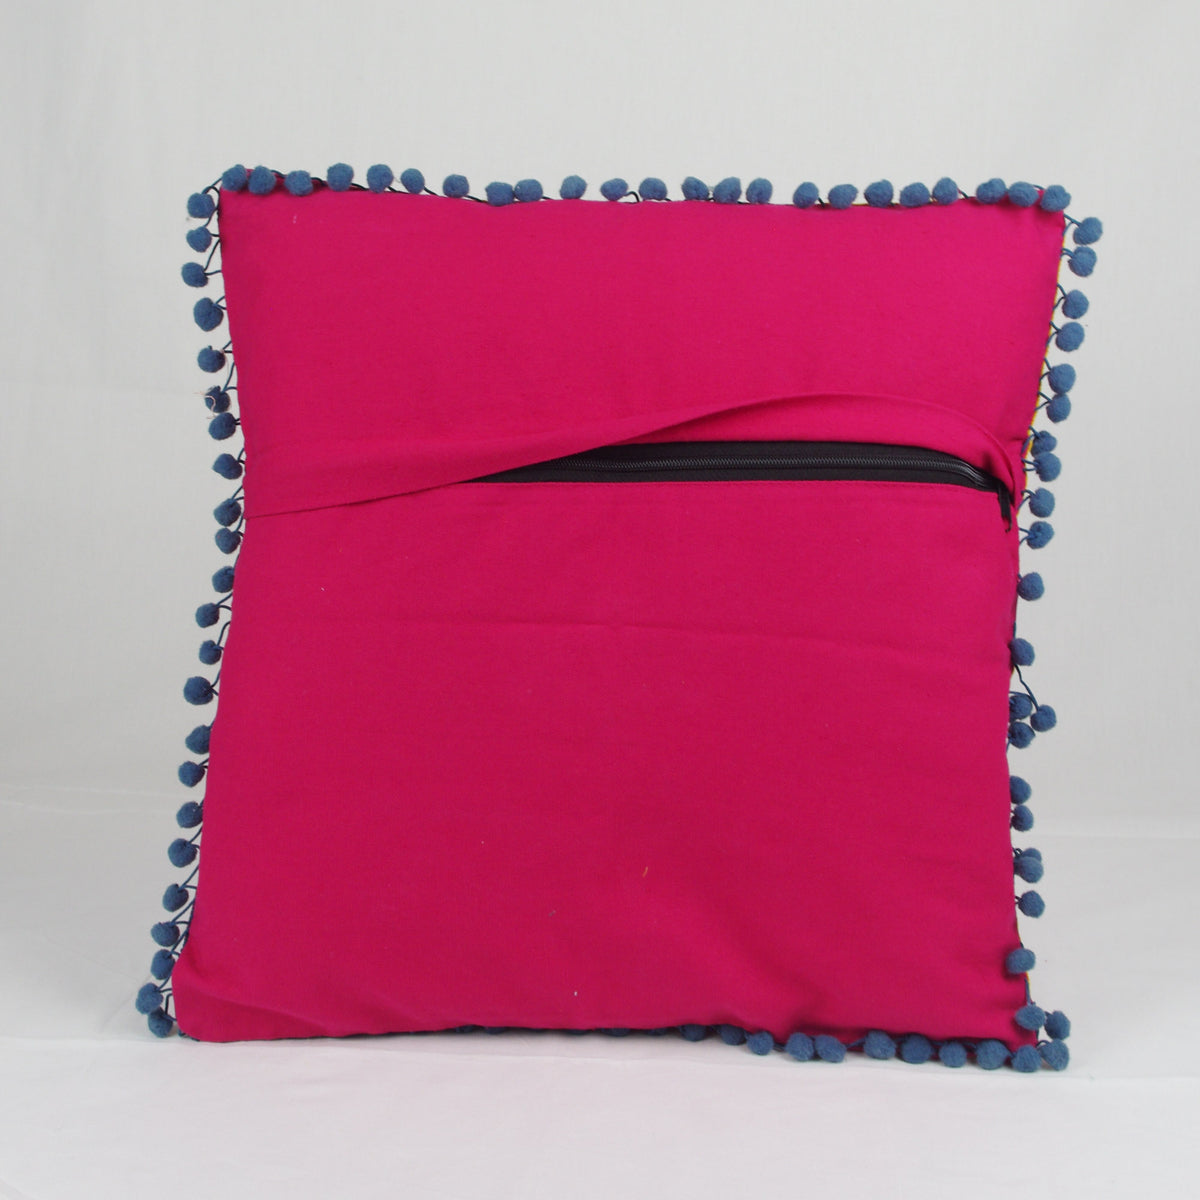 Suzani Woolen Embroidered Cotton Square Cushion Cover - Pink